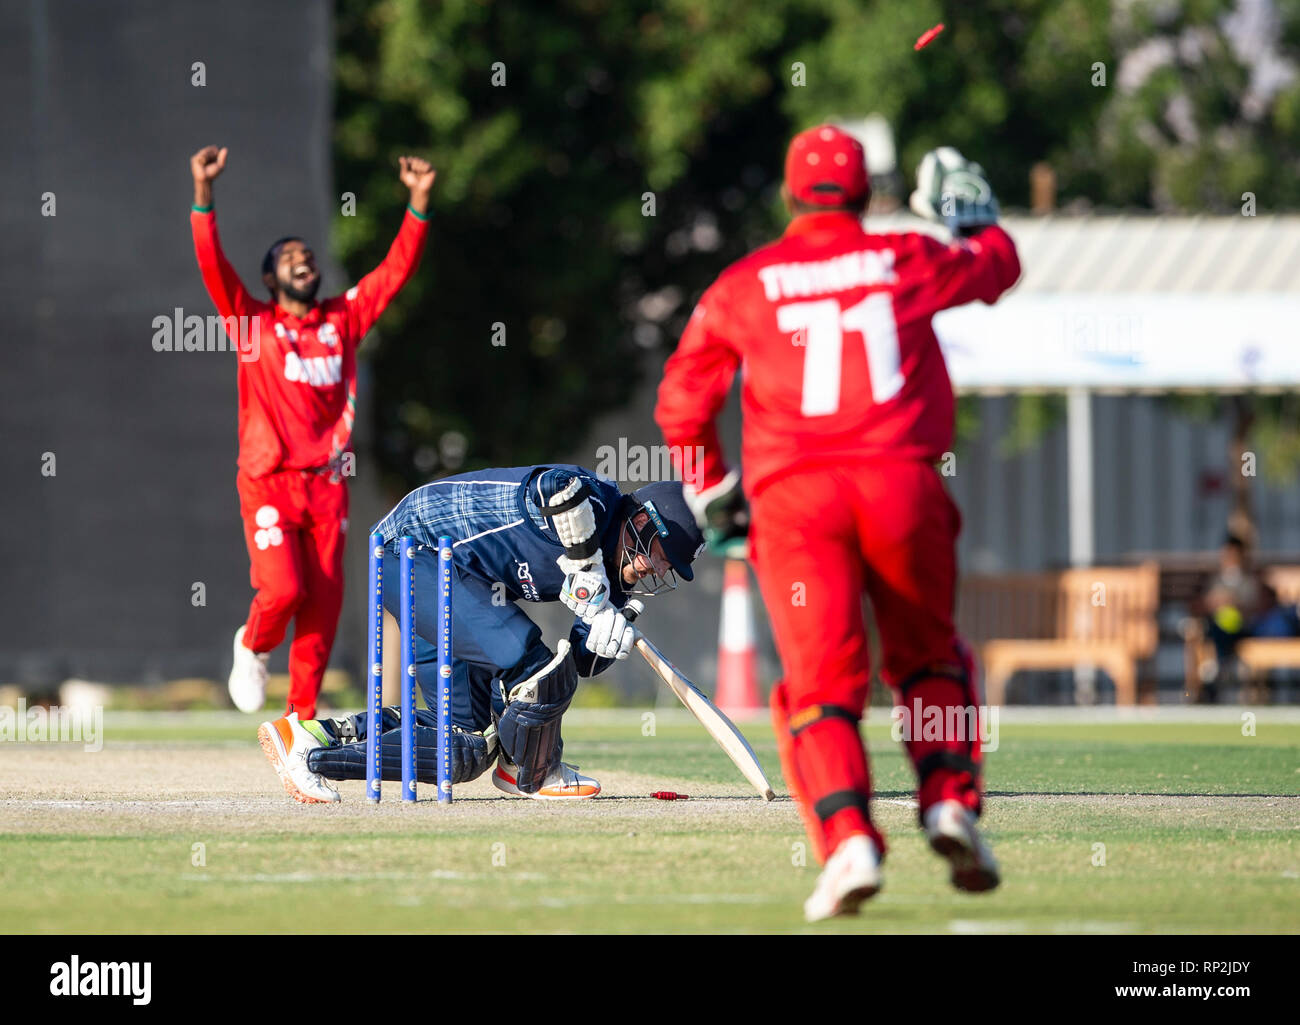 Muscat, Oman. 20th Feb, 2019. Pic shows: Scotland's Mark Watt clean bowled by Oman's Muhammad Nadeem as Oman comprehensively beat Scotland by 93 runs to tie the 3 match 50 over series. Credit: Ian Jacobs/Alamy Live News Stock Photo